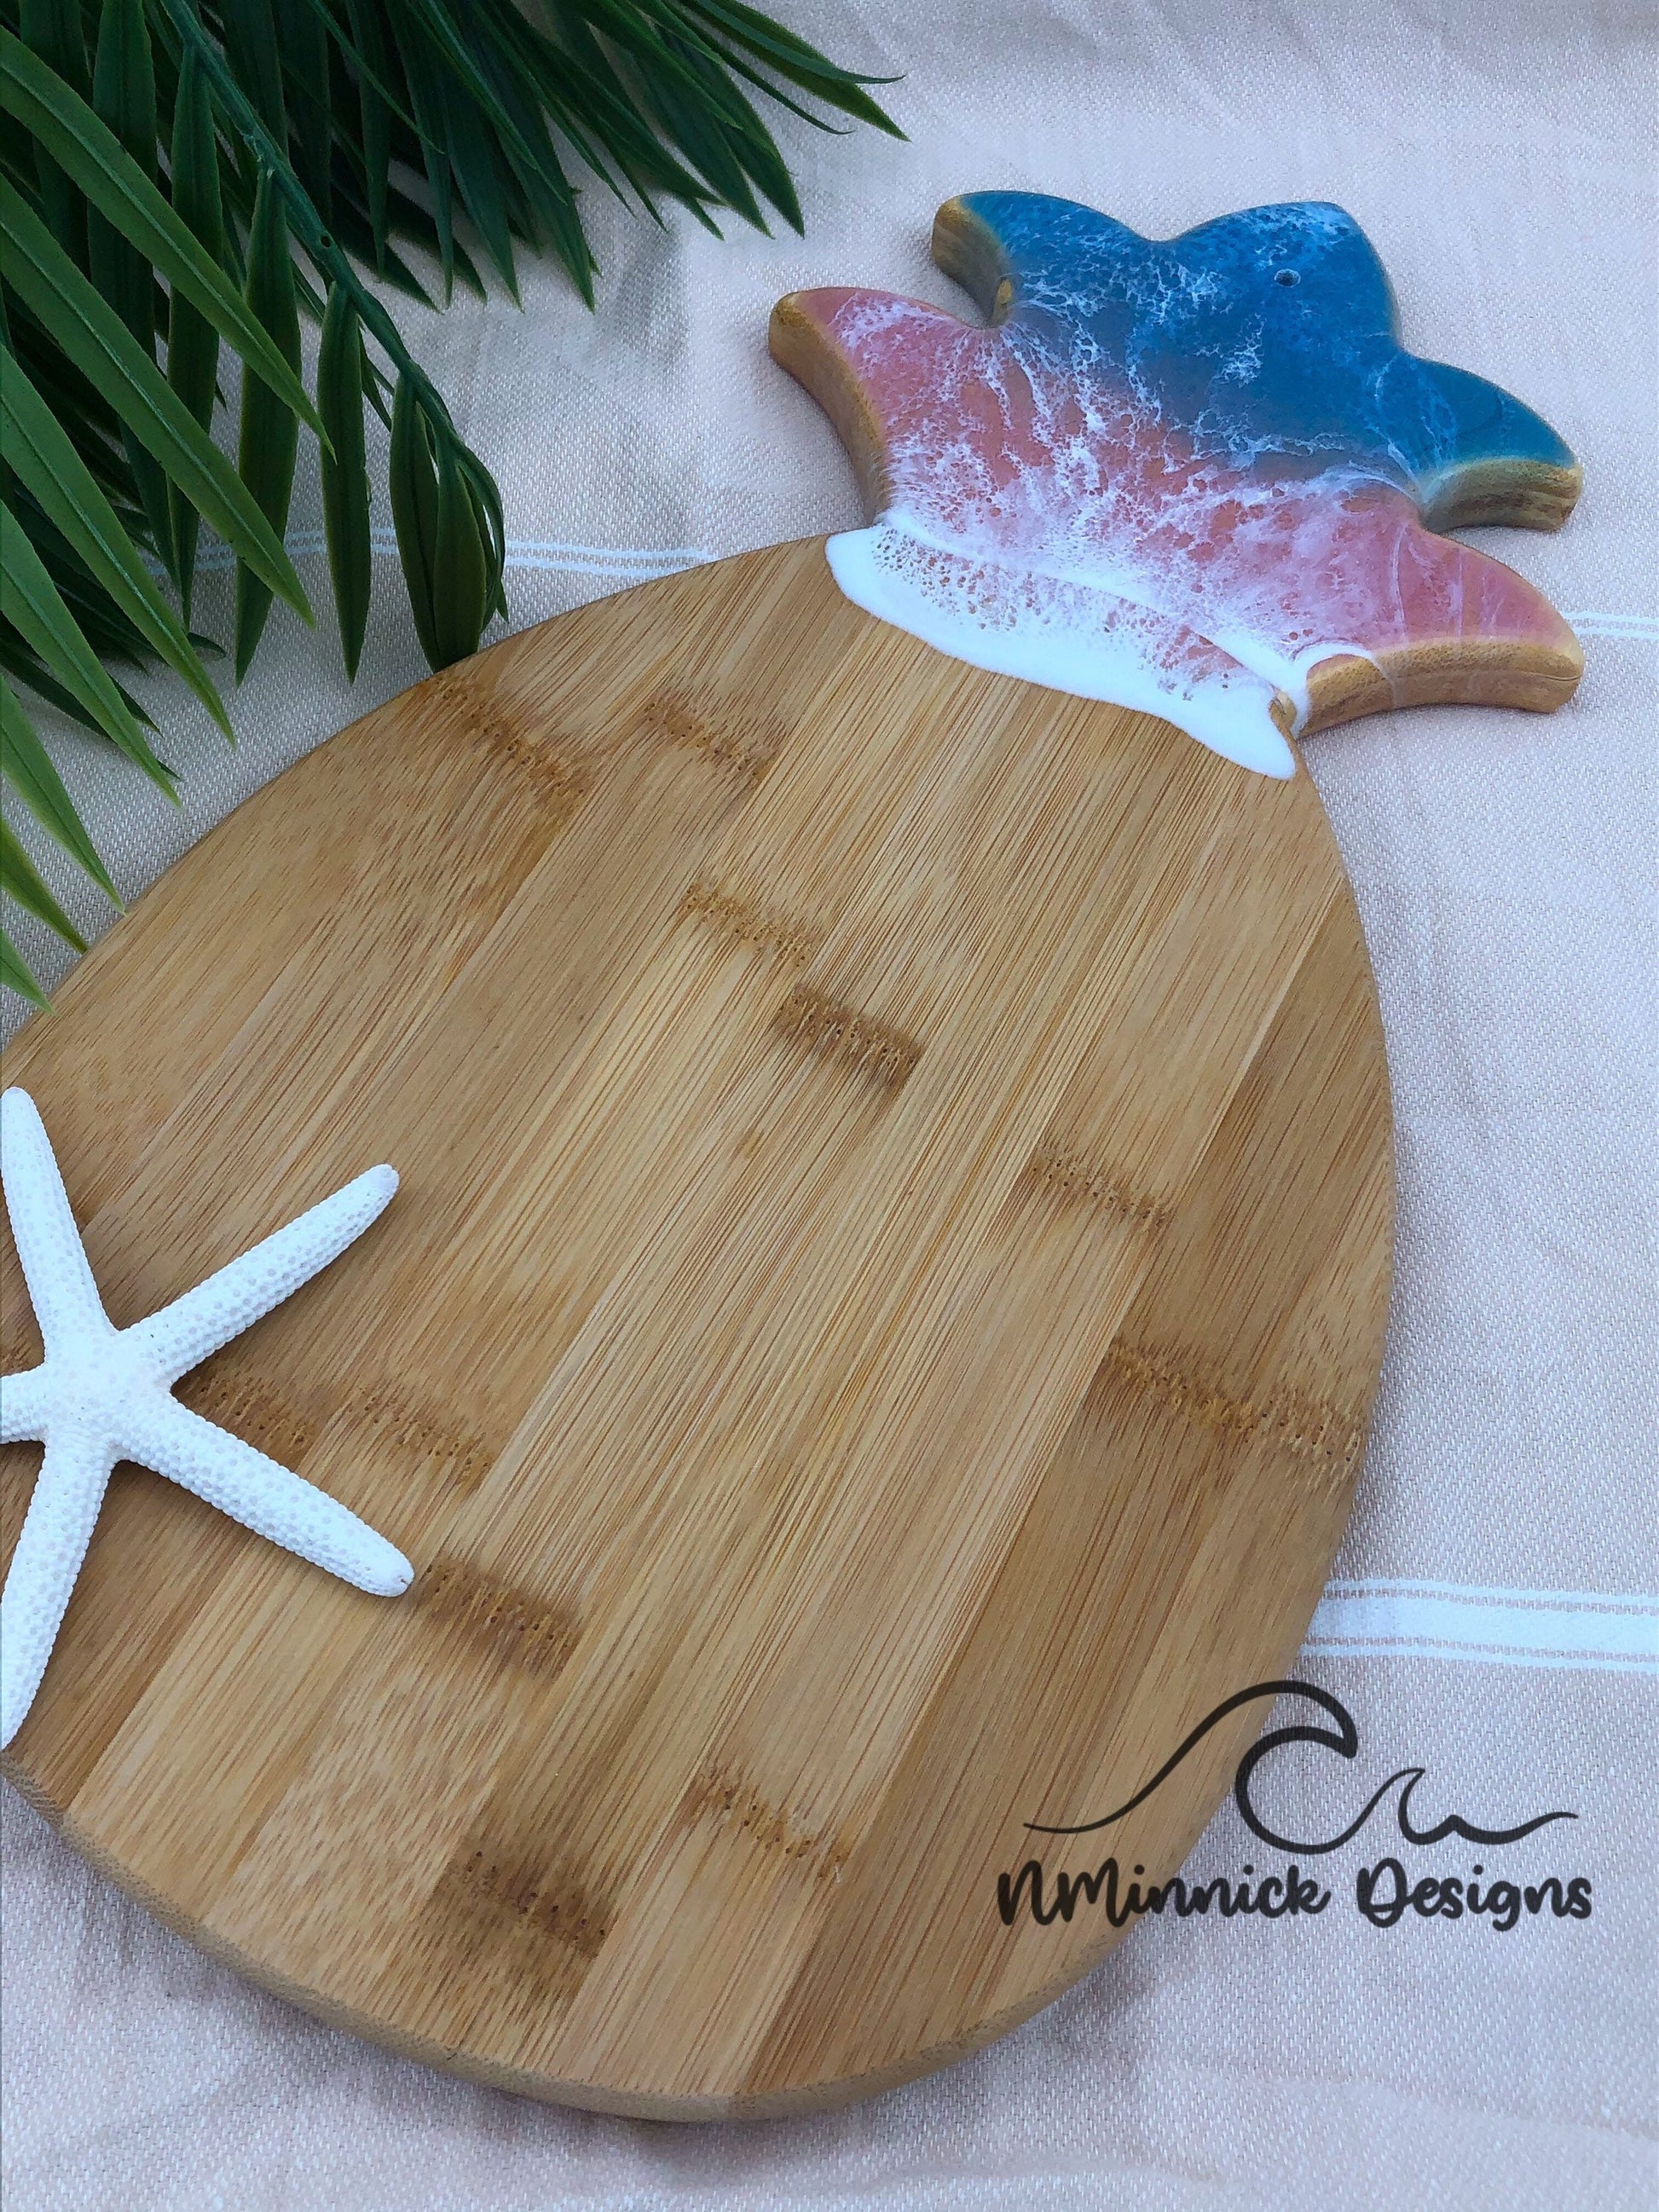 Pineapple-shaped bamboo serving board. Top portion covered in green and pink ocean resin art resembling the waves of the ocean. Laying on a tan beach towel next to a natural starfish (not included).